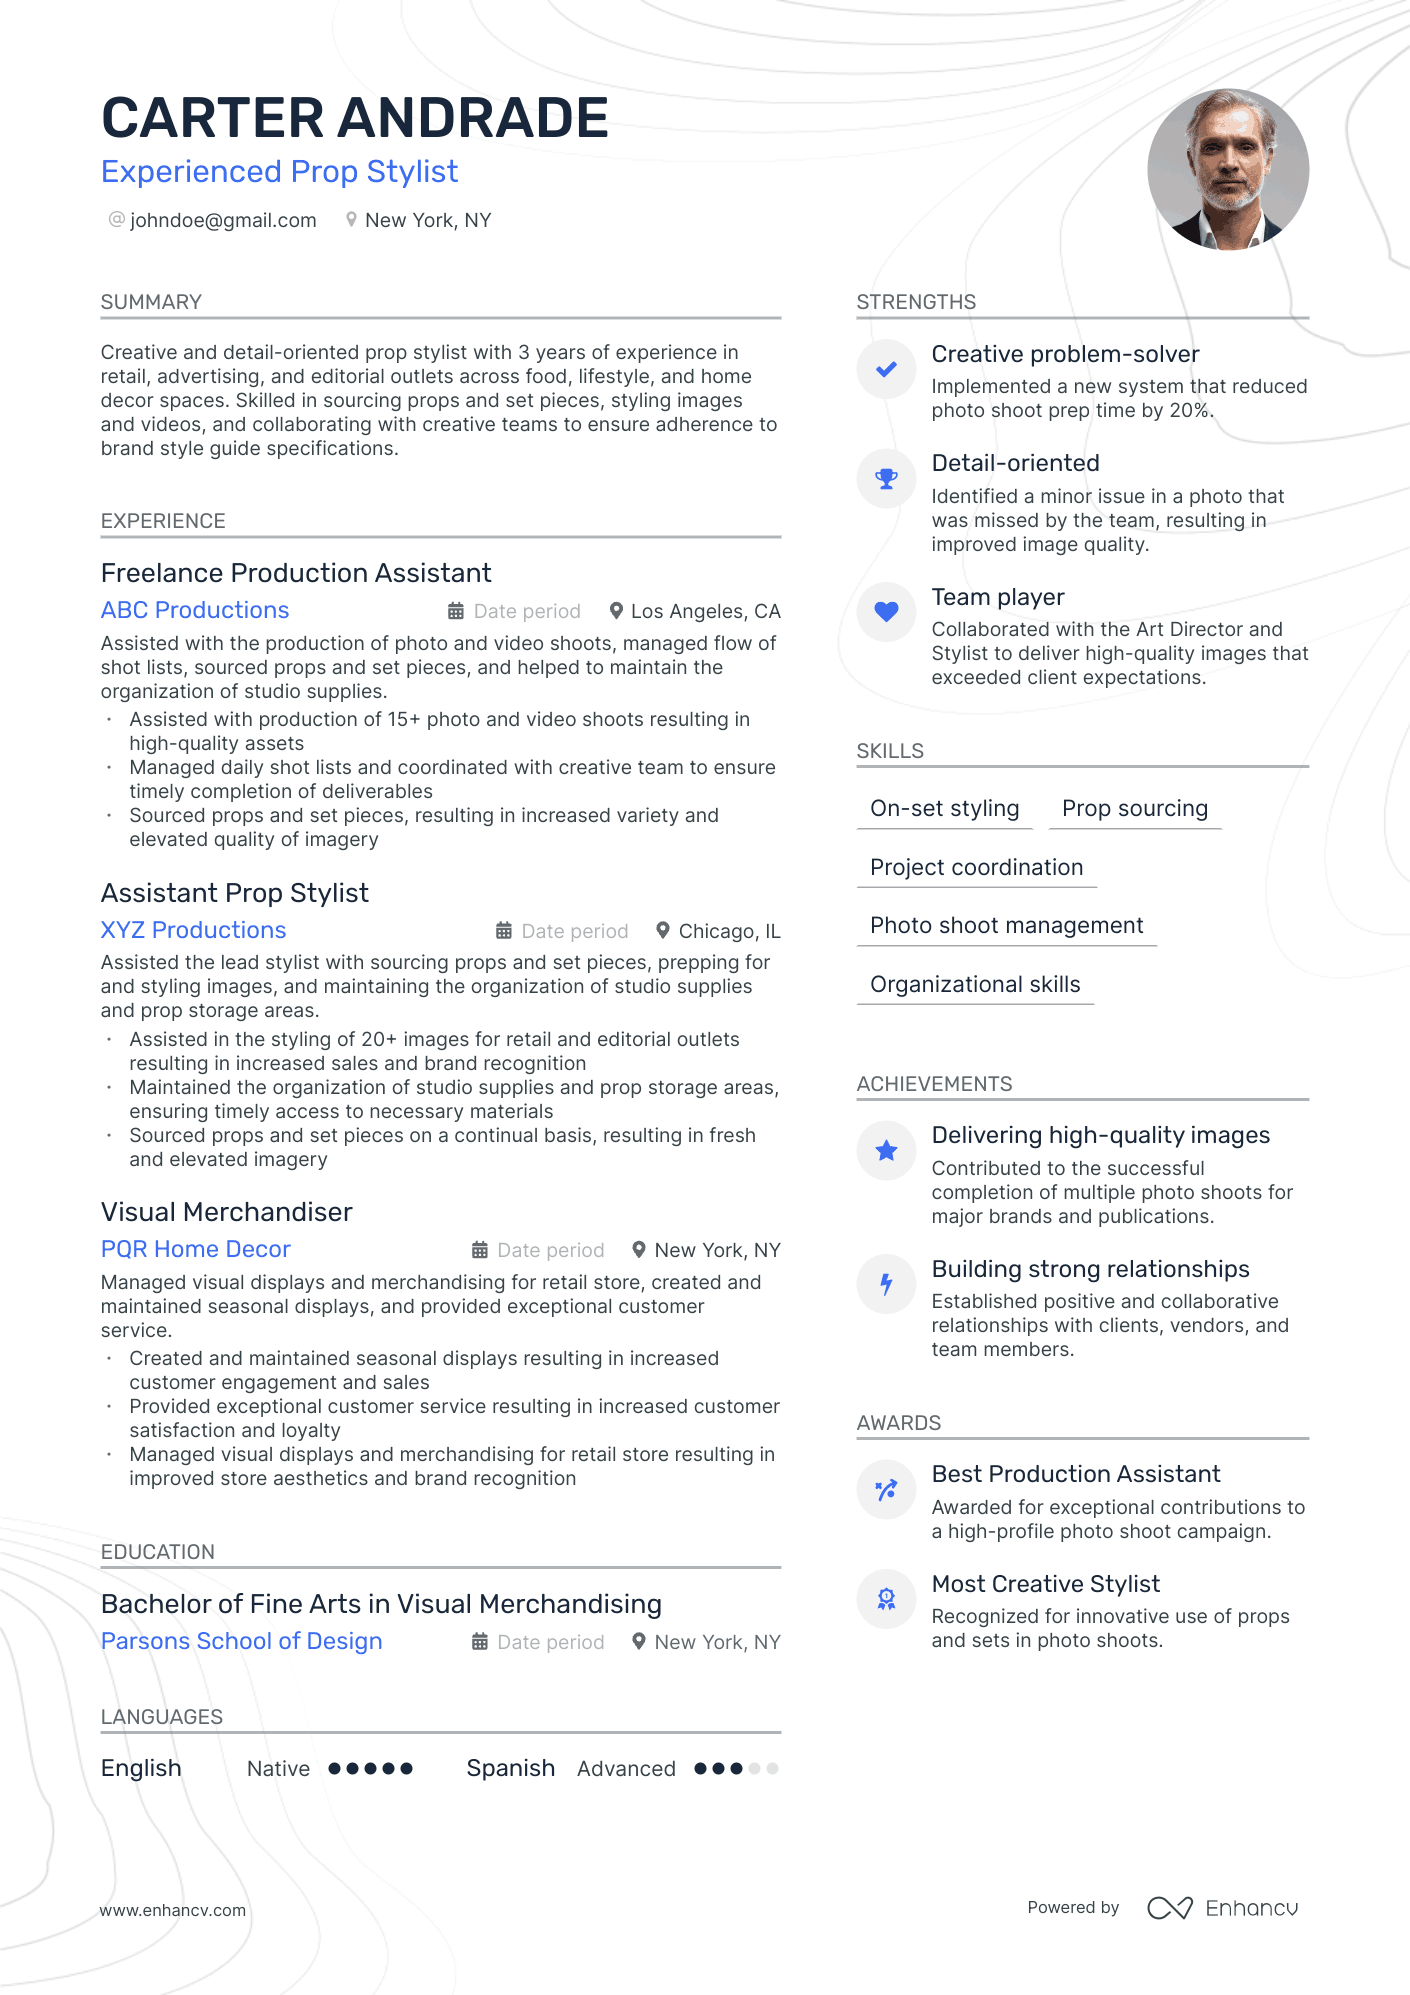 Freelance Production Assistant resume example